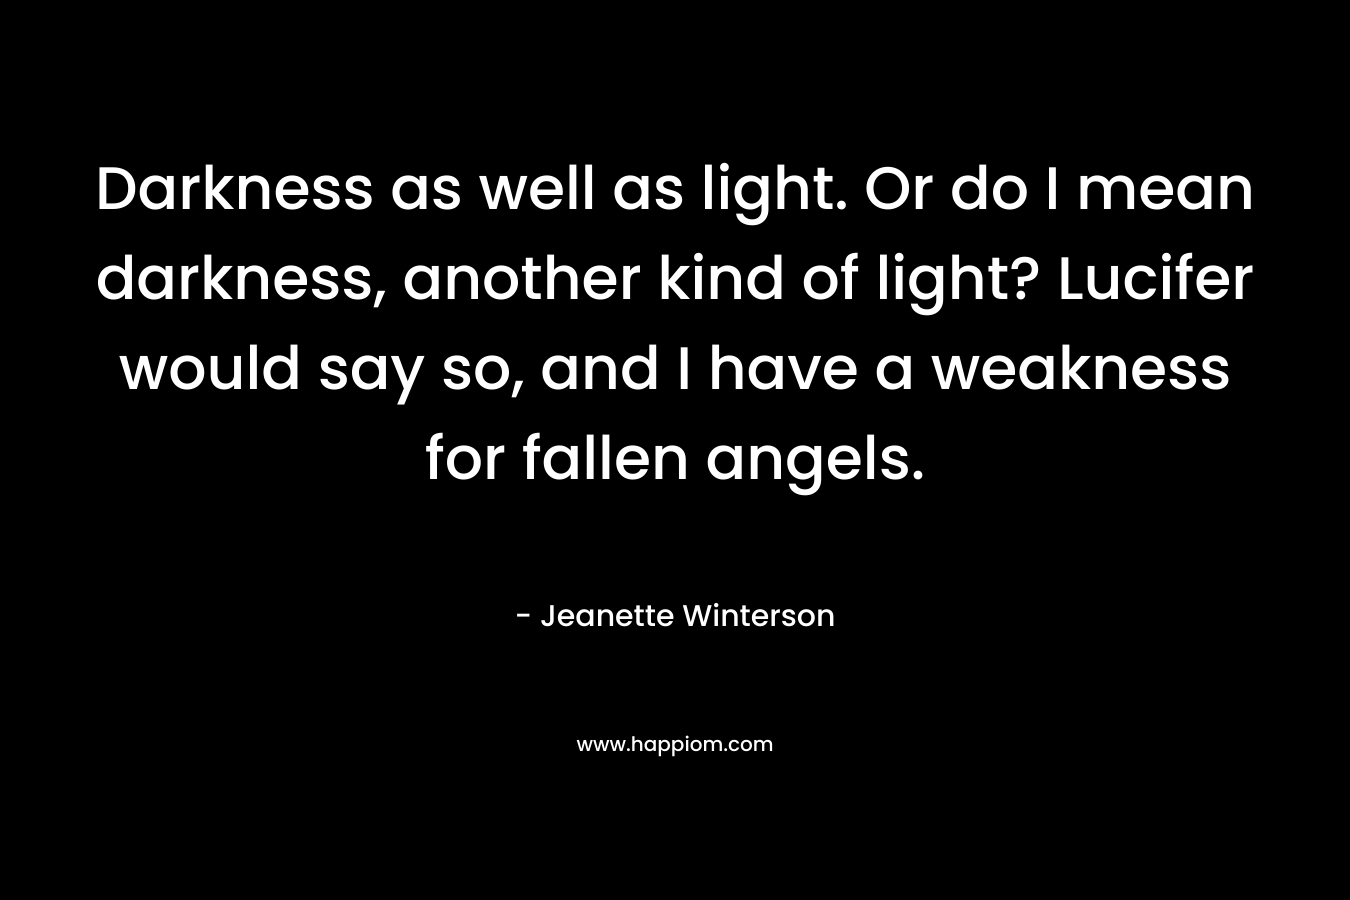 Darkness as well as light. Or do I mean darkness, another kind of light? Lucifer would say so, and I have a weakness for fallen angels.